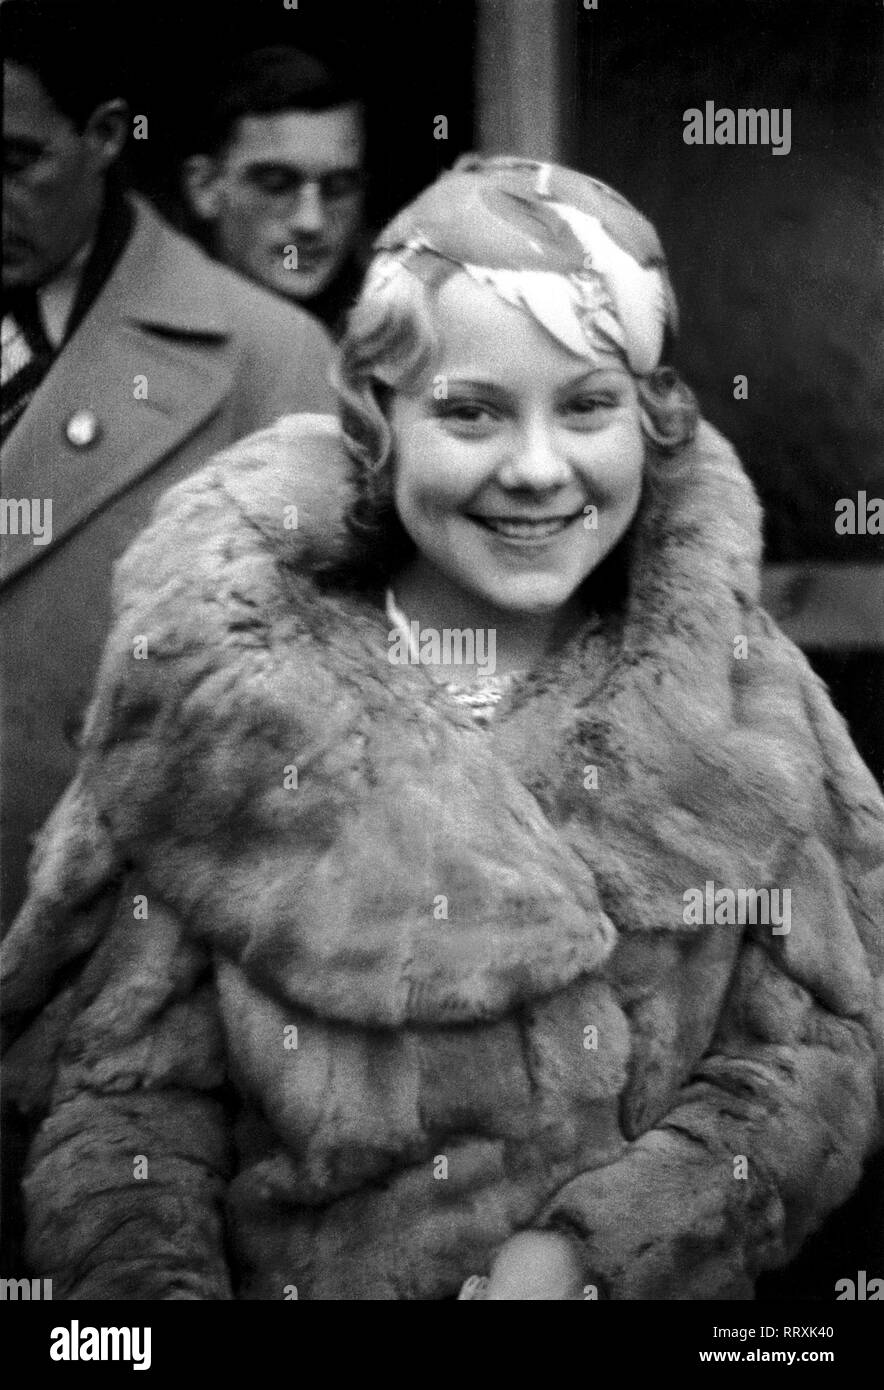 Winter Olympics 1936 - Germany, Third Reich - Olympic Winter Games, Winter Olympics 1936 in Garmisch. Norwegian ice skater Sonja Henie as guest at the  opening ceremony. Image date February 1936. Photo Erich Andres Stock Photo